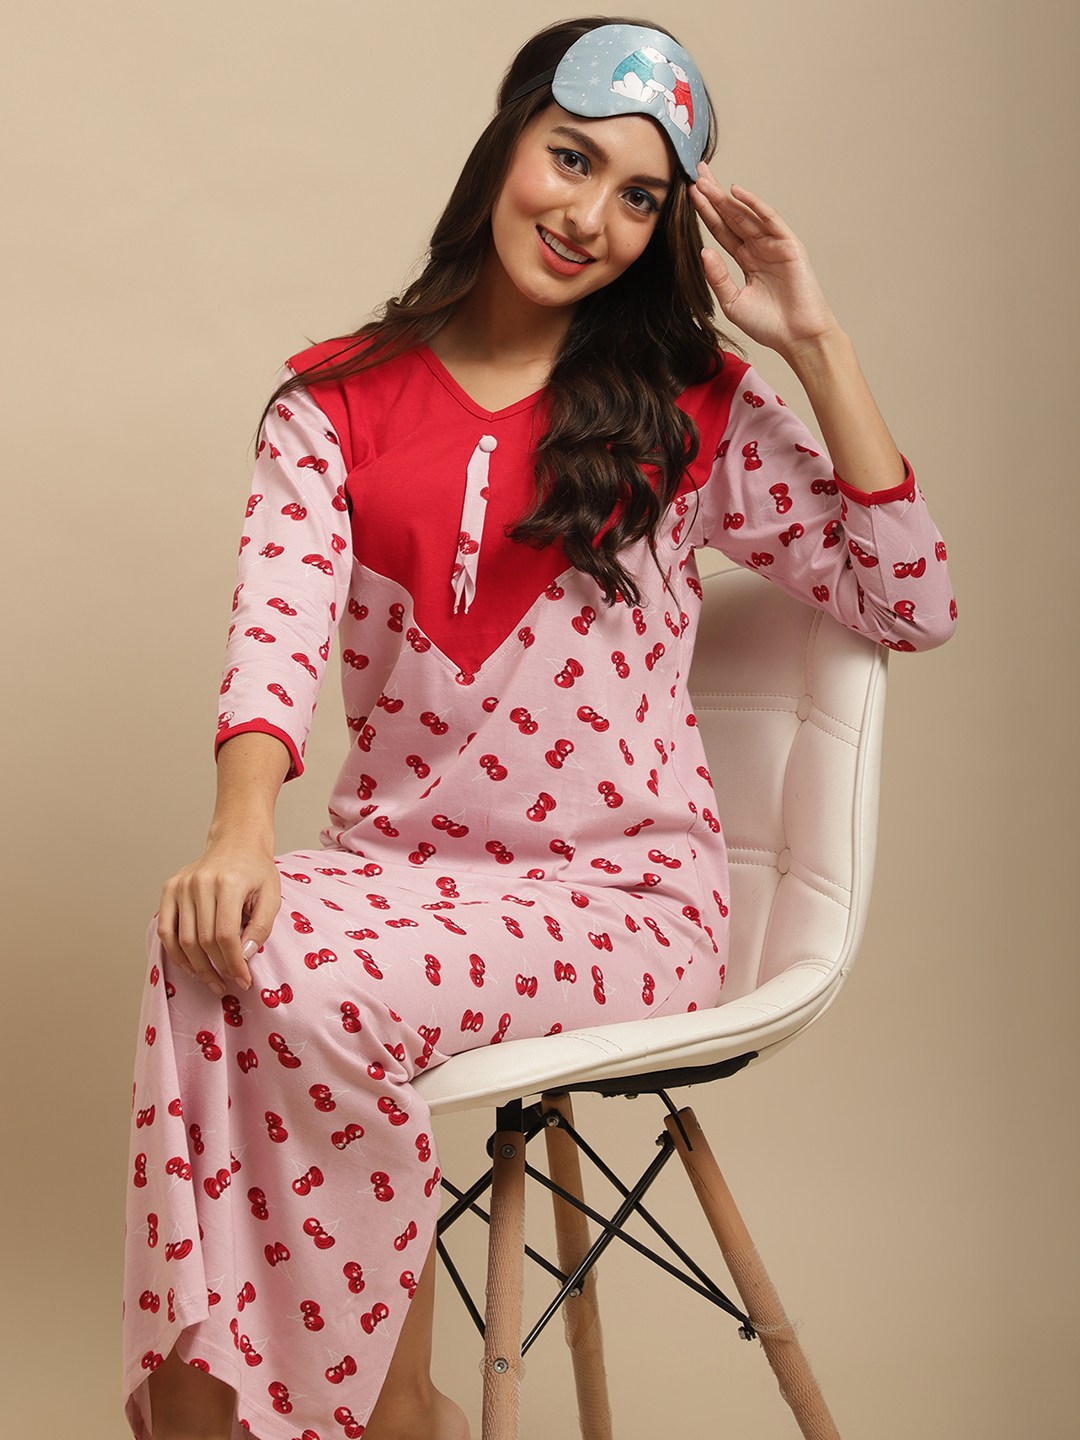 Pink Color Abstract Printed Cotton nighty For Women Claura Designs Pvt. Ltd. Nighty Cotton, Full Sleeves, Long Sleeves, Nightdress, Nighty, Pink, Printed, Sleepwear